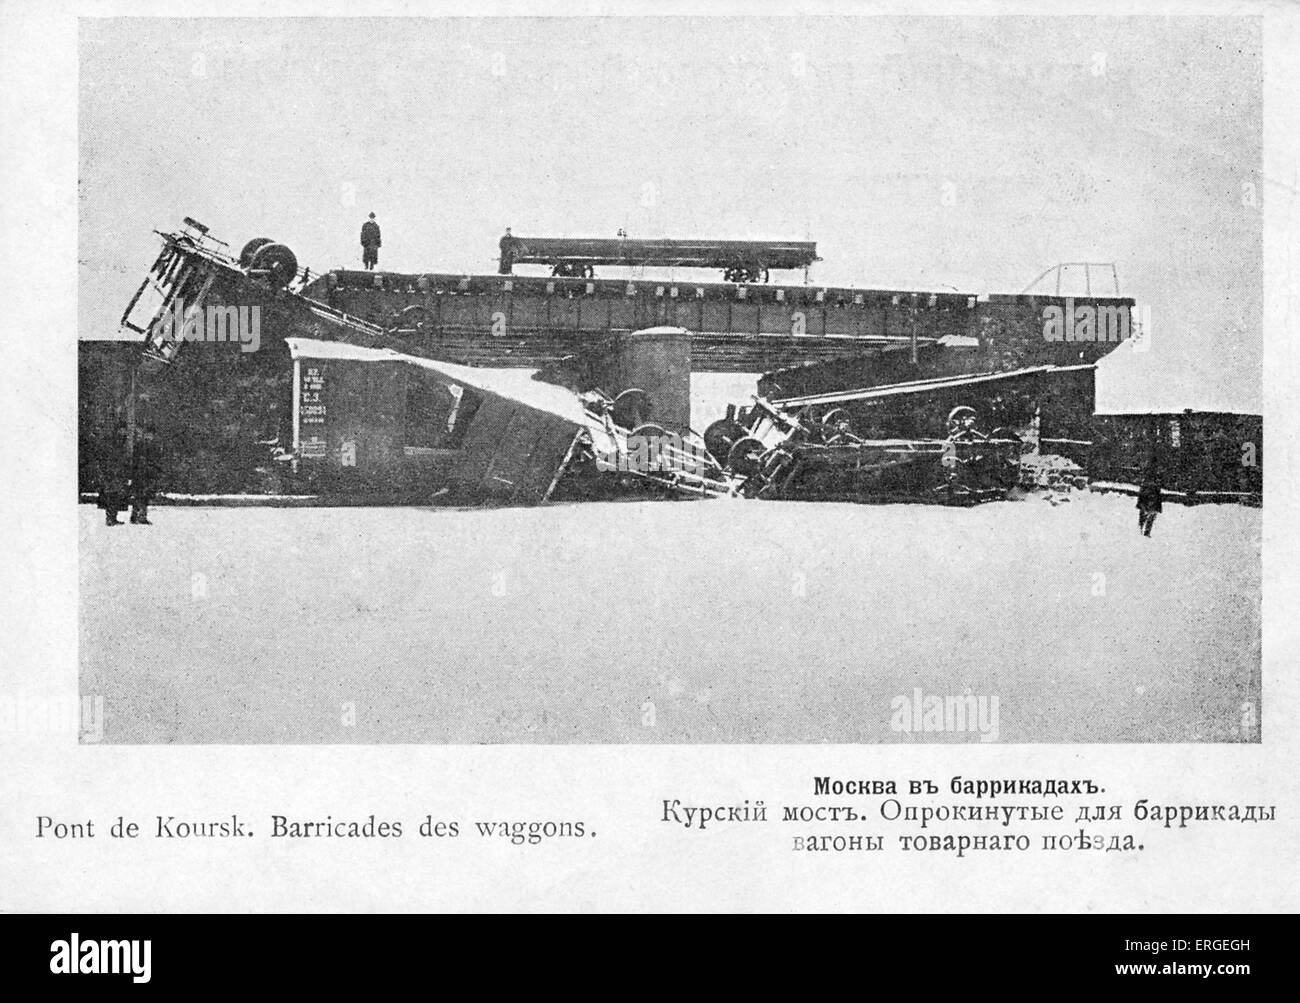 Street barricades during 1905 Russian Revolution - lorry barricade at Kursk bridge, Moscow. Wave of mass political and social unrest that spread through vast areas of the Russian Empire (1905 - 1908). Defeated by Nicholas II. Stock Photo